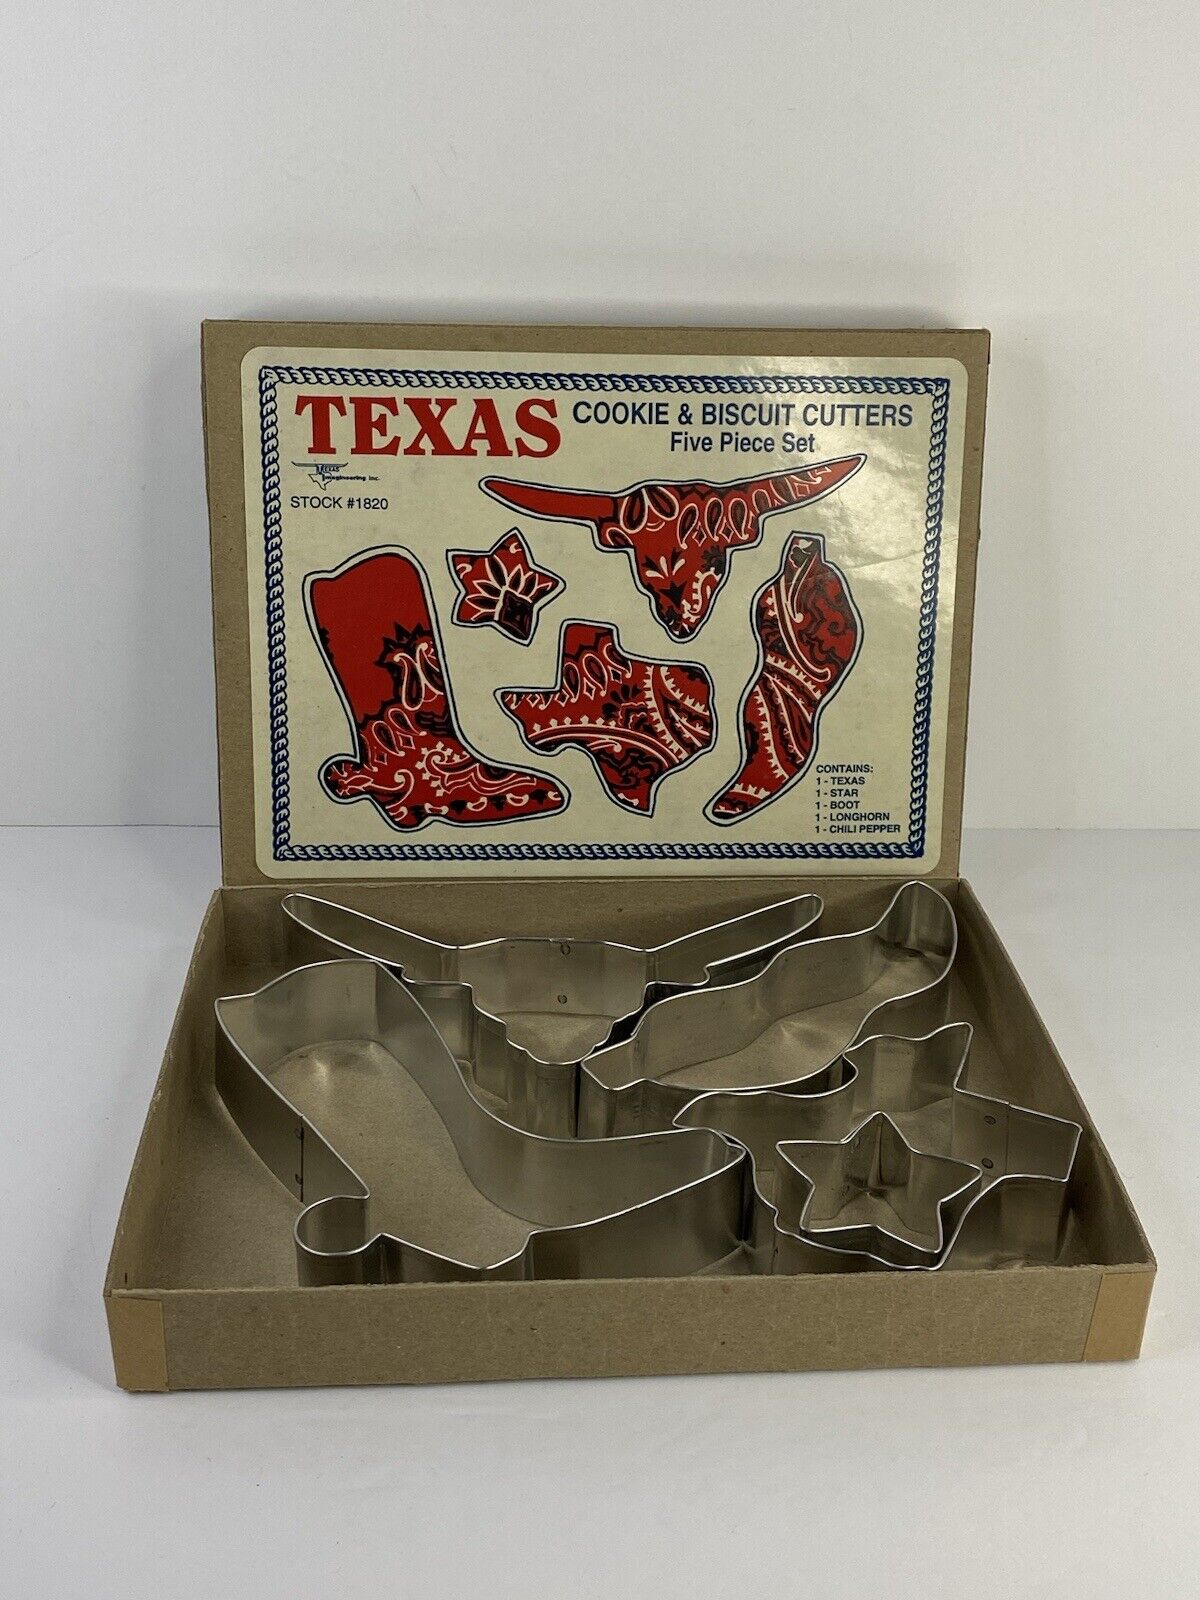 Vintage Texas Cookie And Biscuit Cutters - Five Piece Set By Texas Imagineering